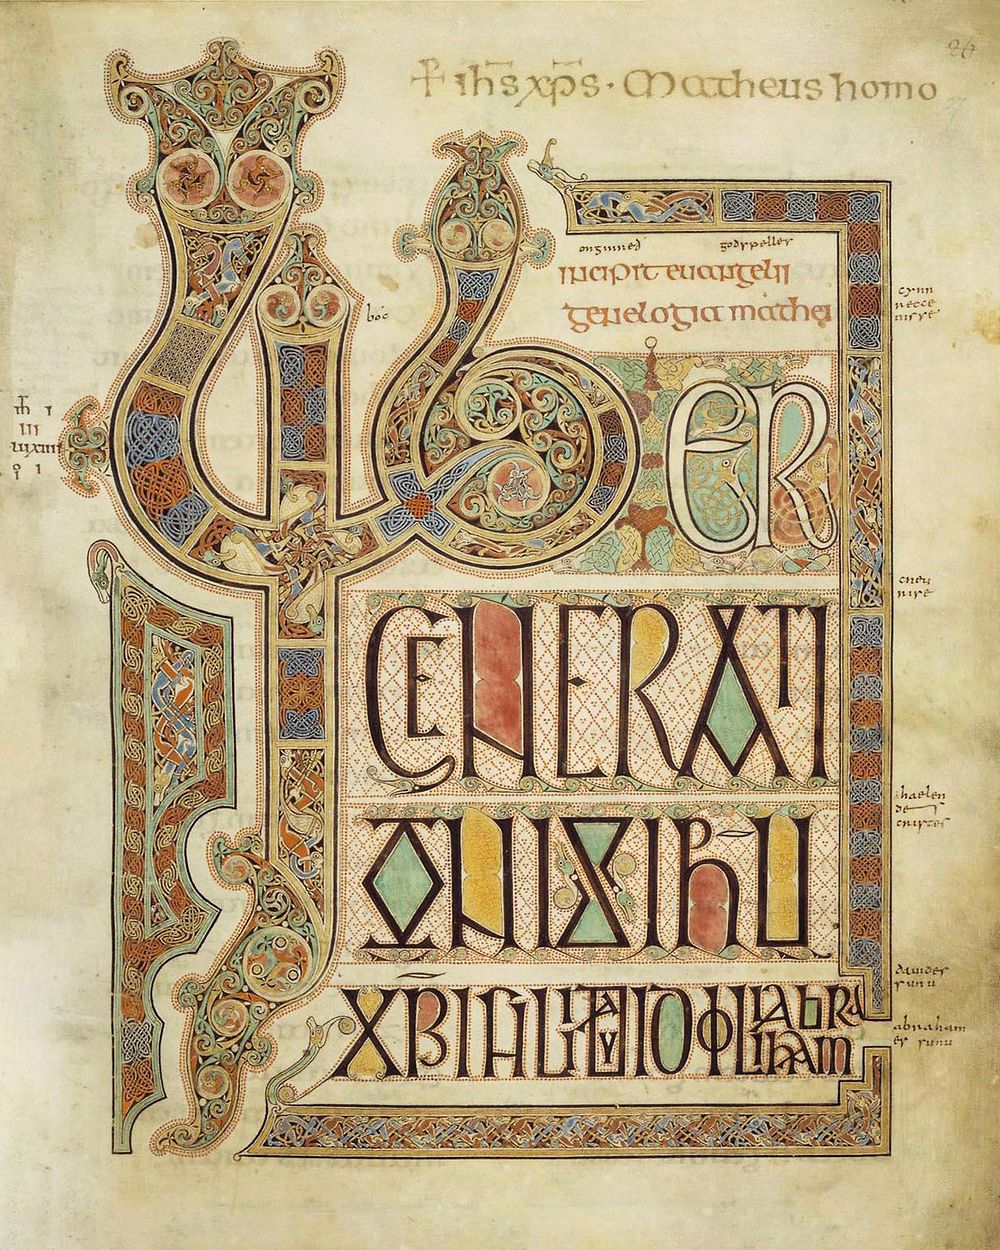 Folio 27r from the Lindisfarne Gospels, incipit to the Gospel of Matthew. The main text contains the first sentence of the…